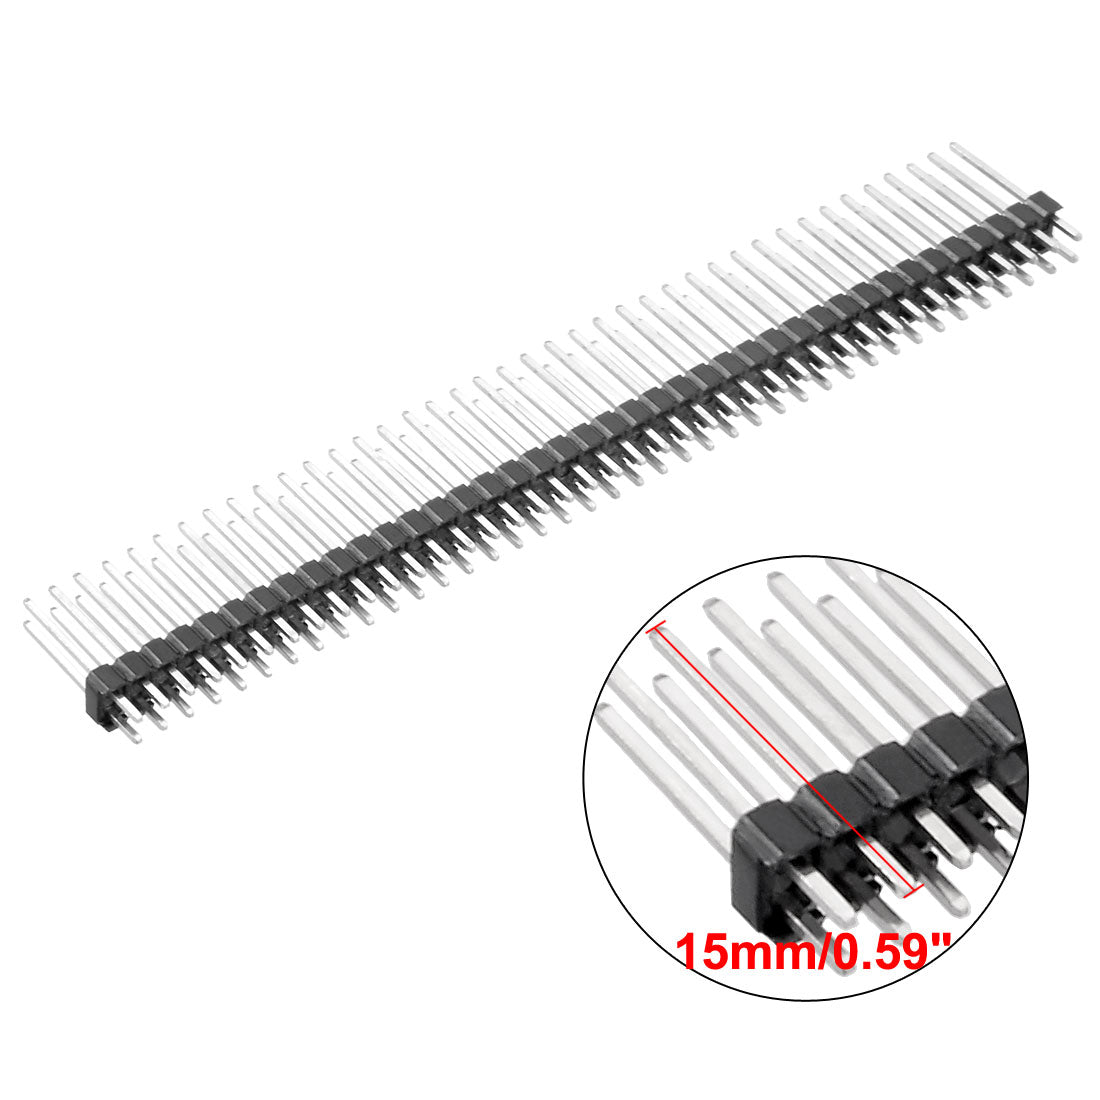 uxcell Uxcell 5Pcs 2.54mm Pitch 40-Pin 15mm Length Double Row Straight Connector Pin Header Strip for Arduino Prototype Shield